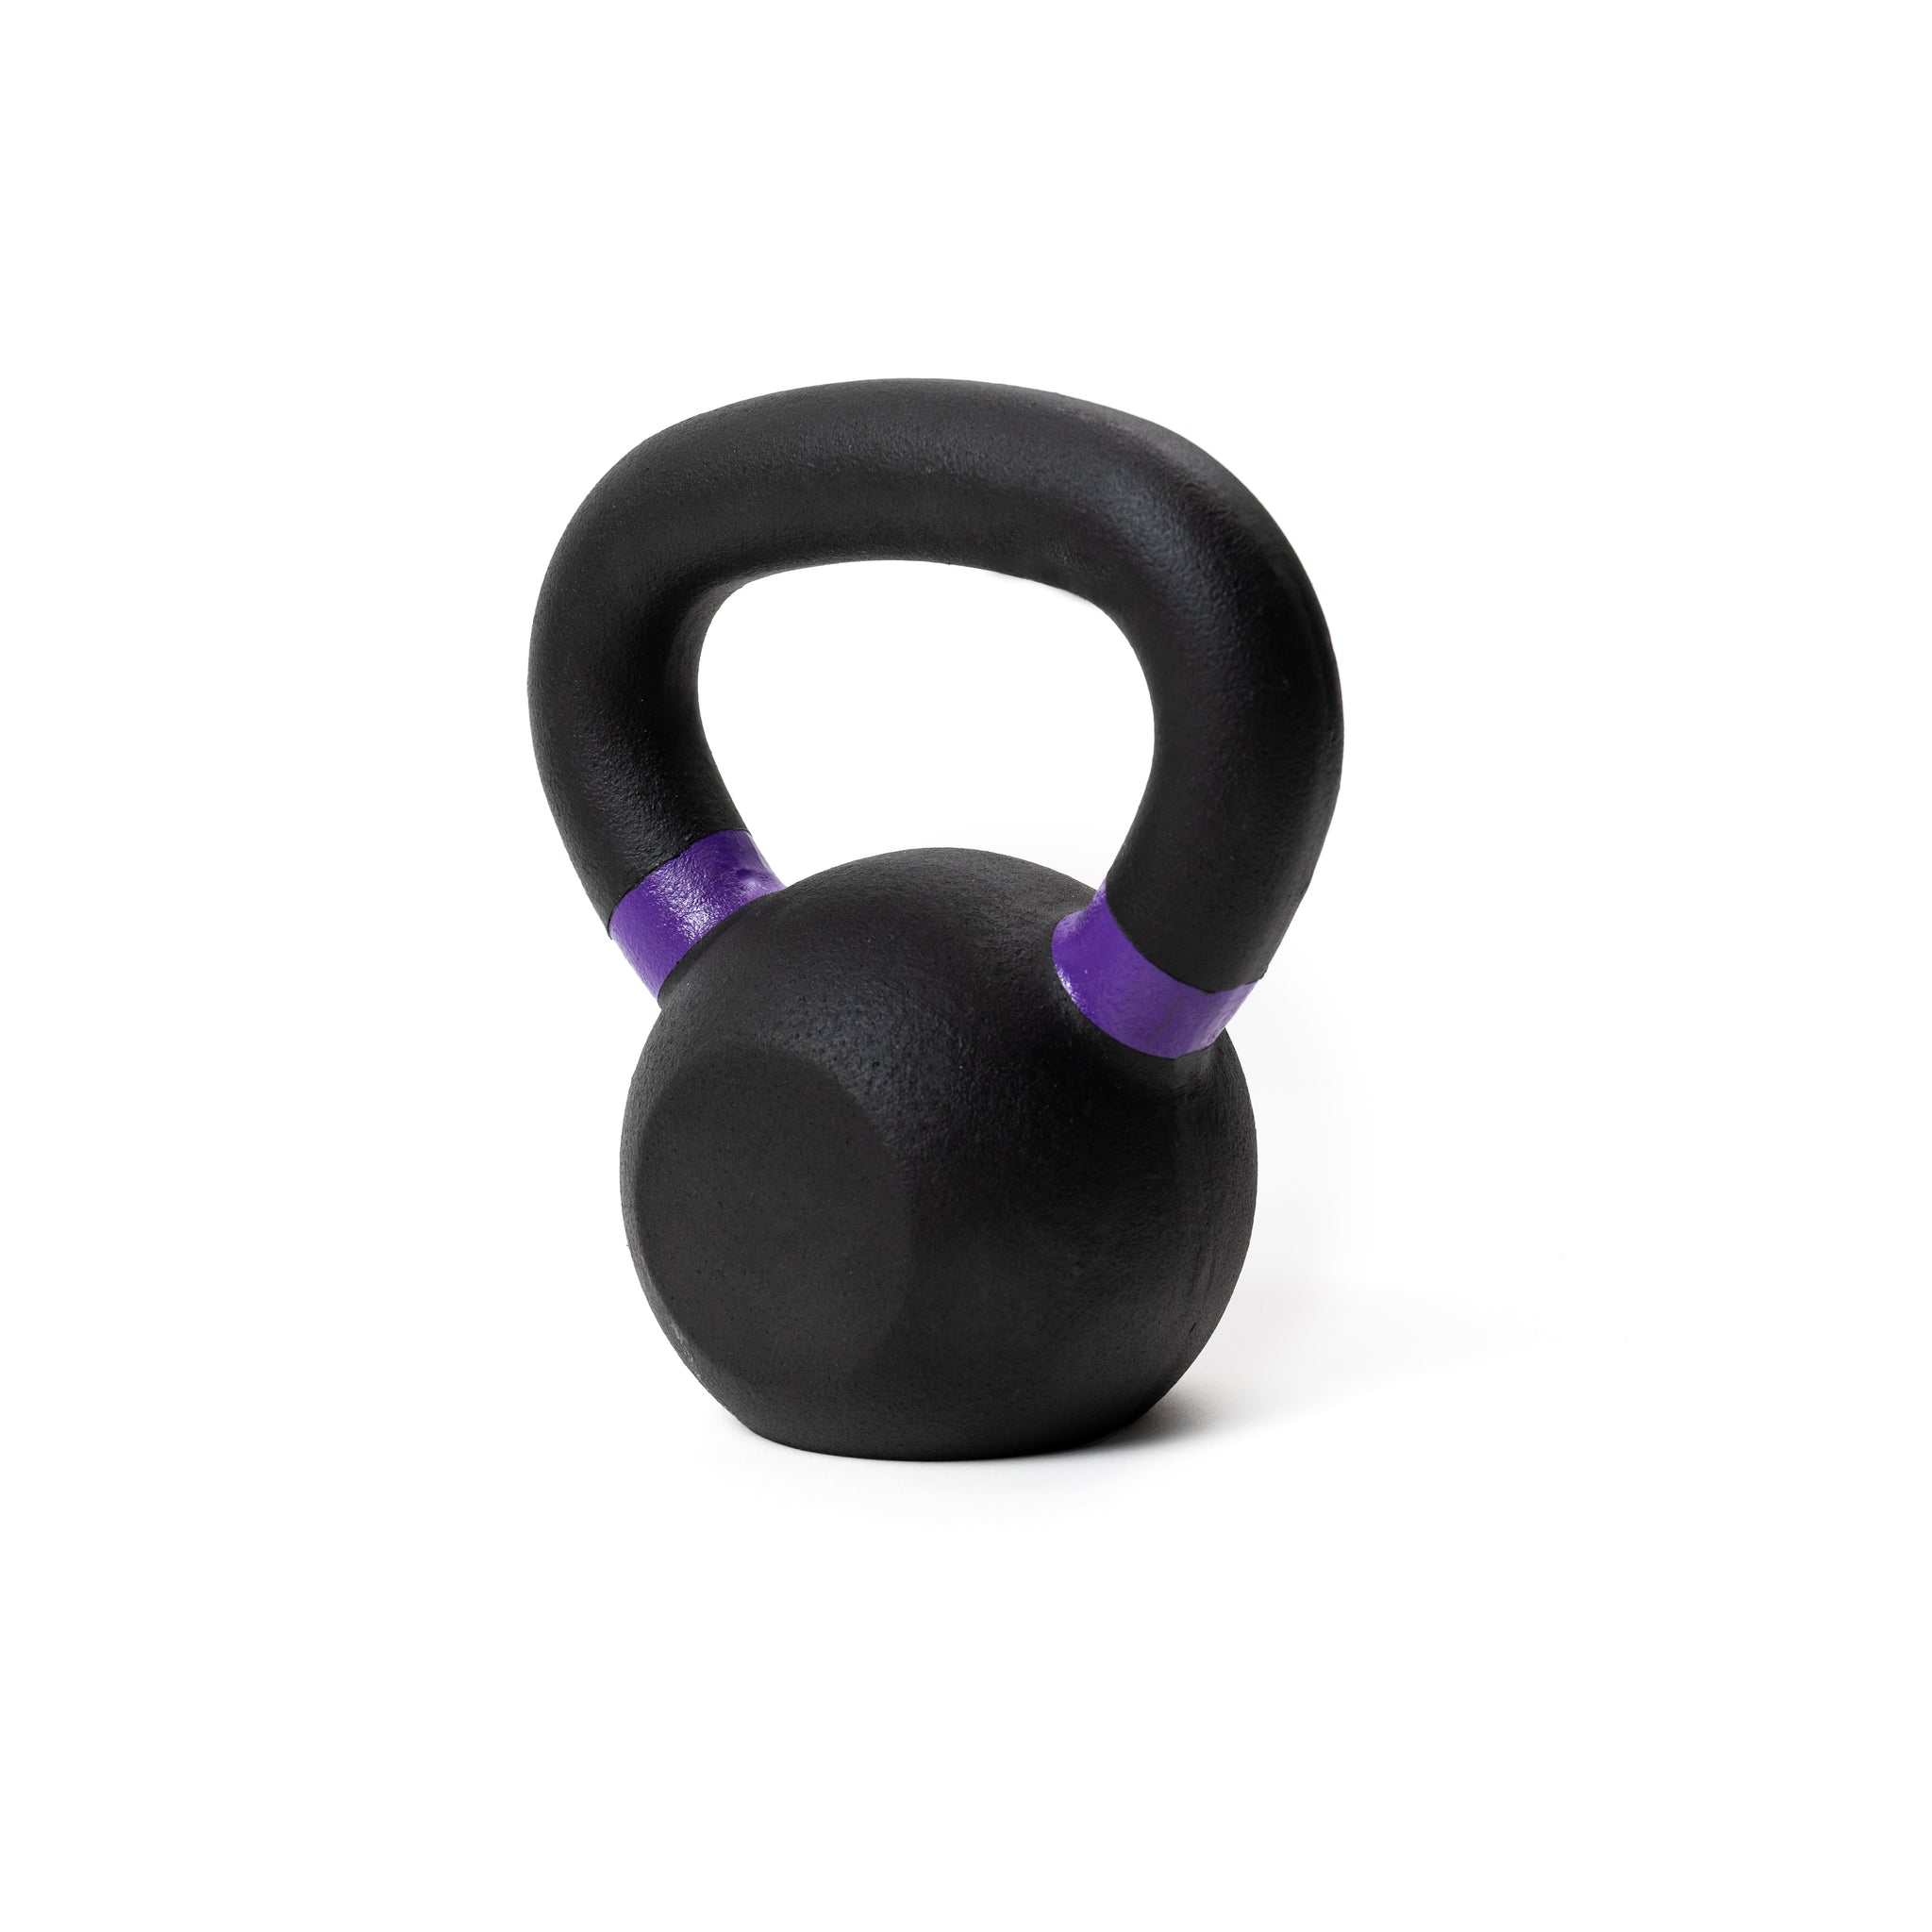 15 lb black kettlebell with some purple on the handle. 